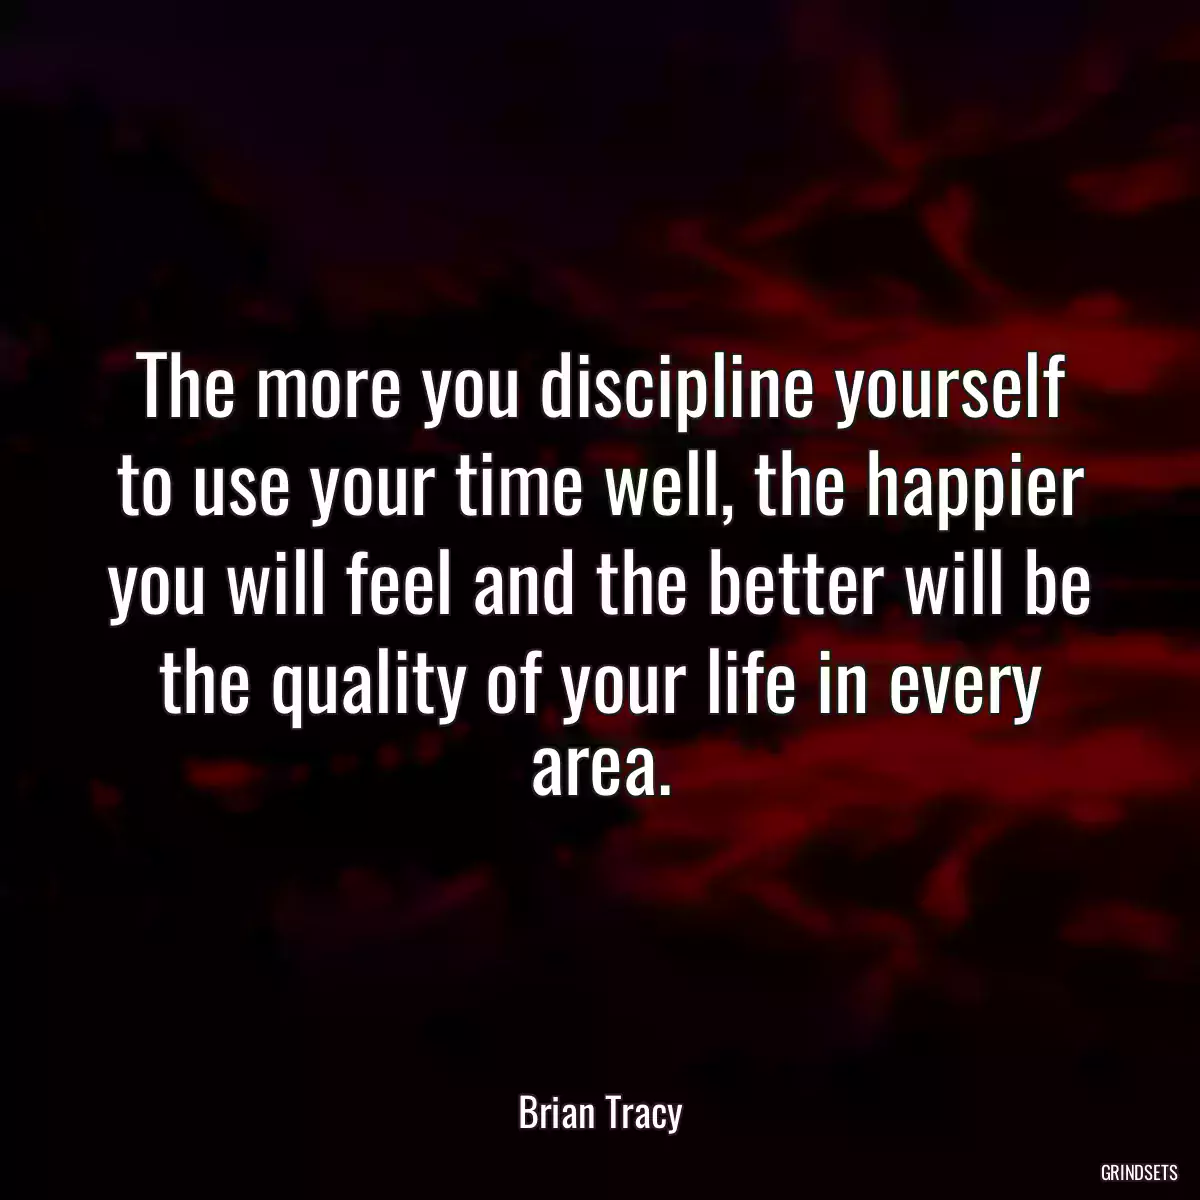 The more you discipline yourself to use your time well, the happier you will feel and the better will be the quality of your life in every area.